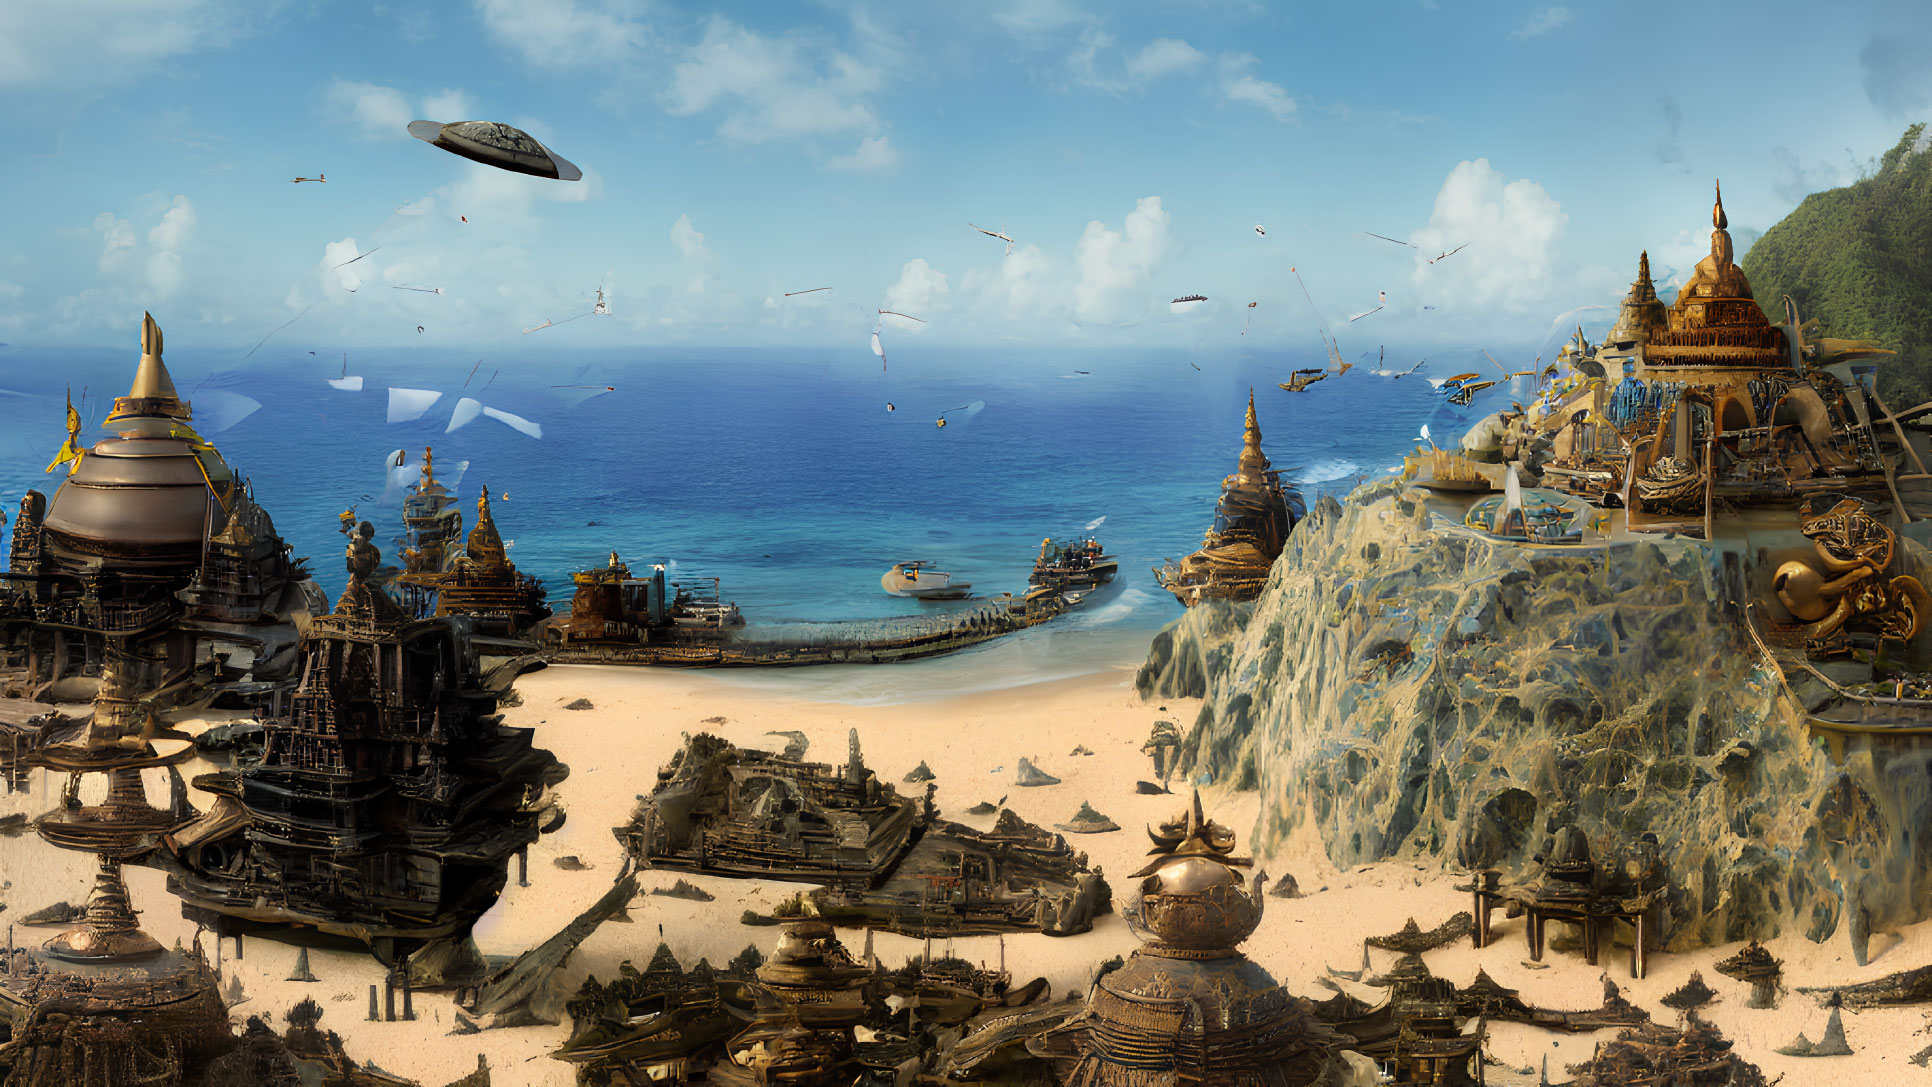 Panoramic fantasy landscape with ornate buildings, beach, ocean, ships, flying creatures, and